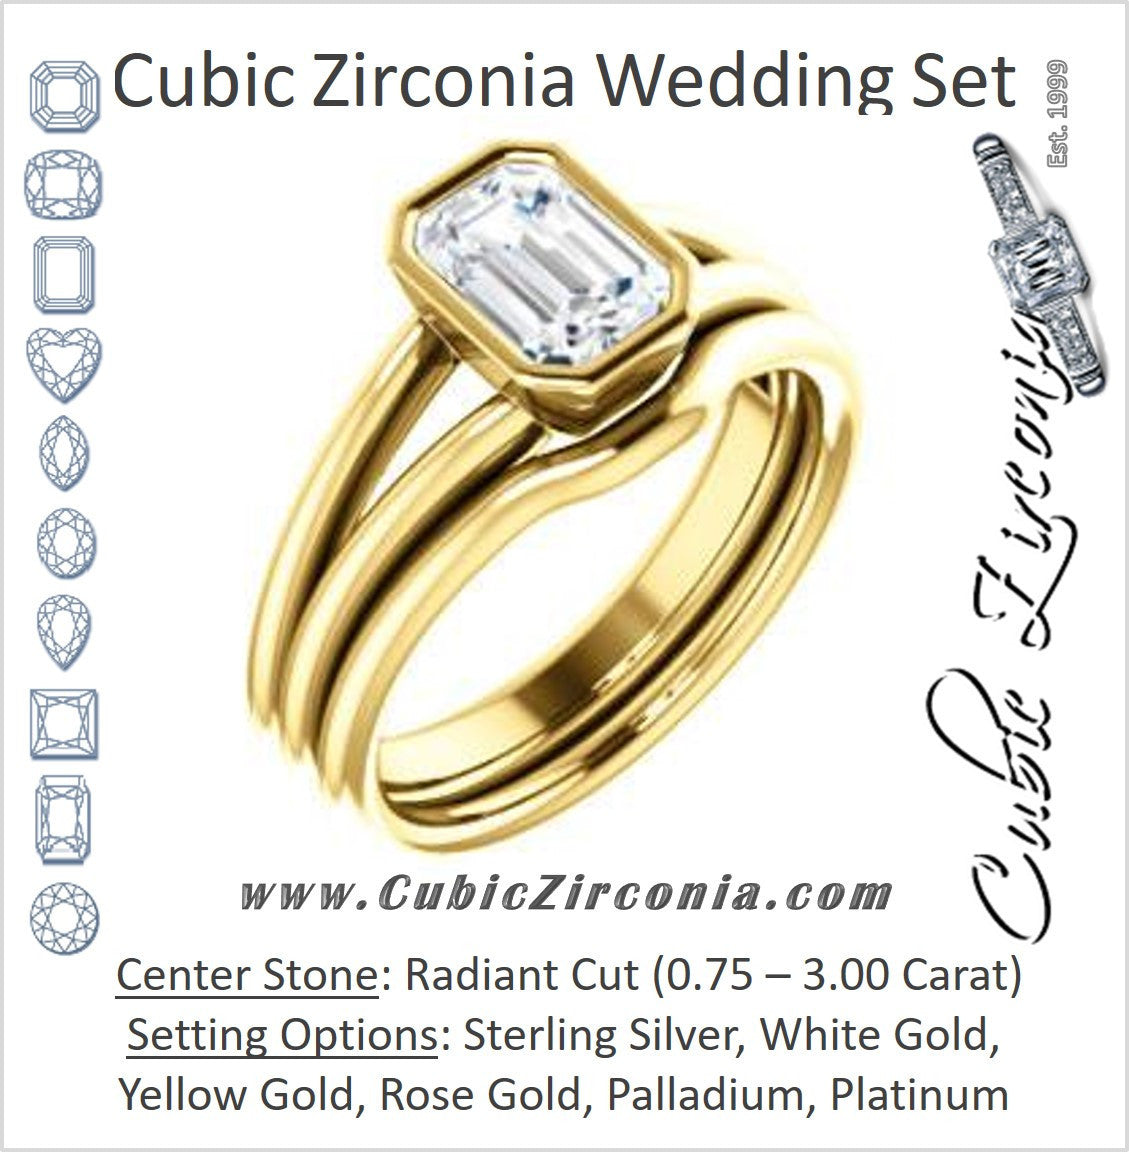 CZ Wedding Set, featuring The Shae engagement ring (Customizable Radiant Cut Split-Band Solitaire)